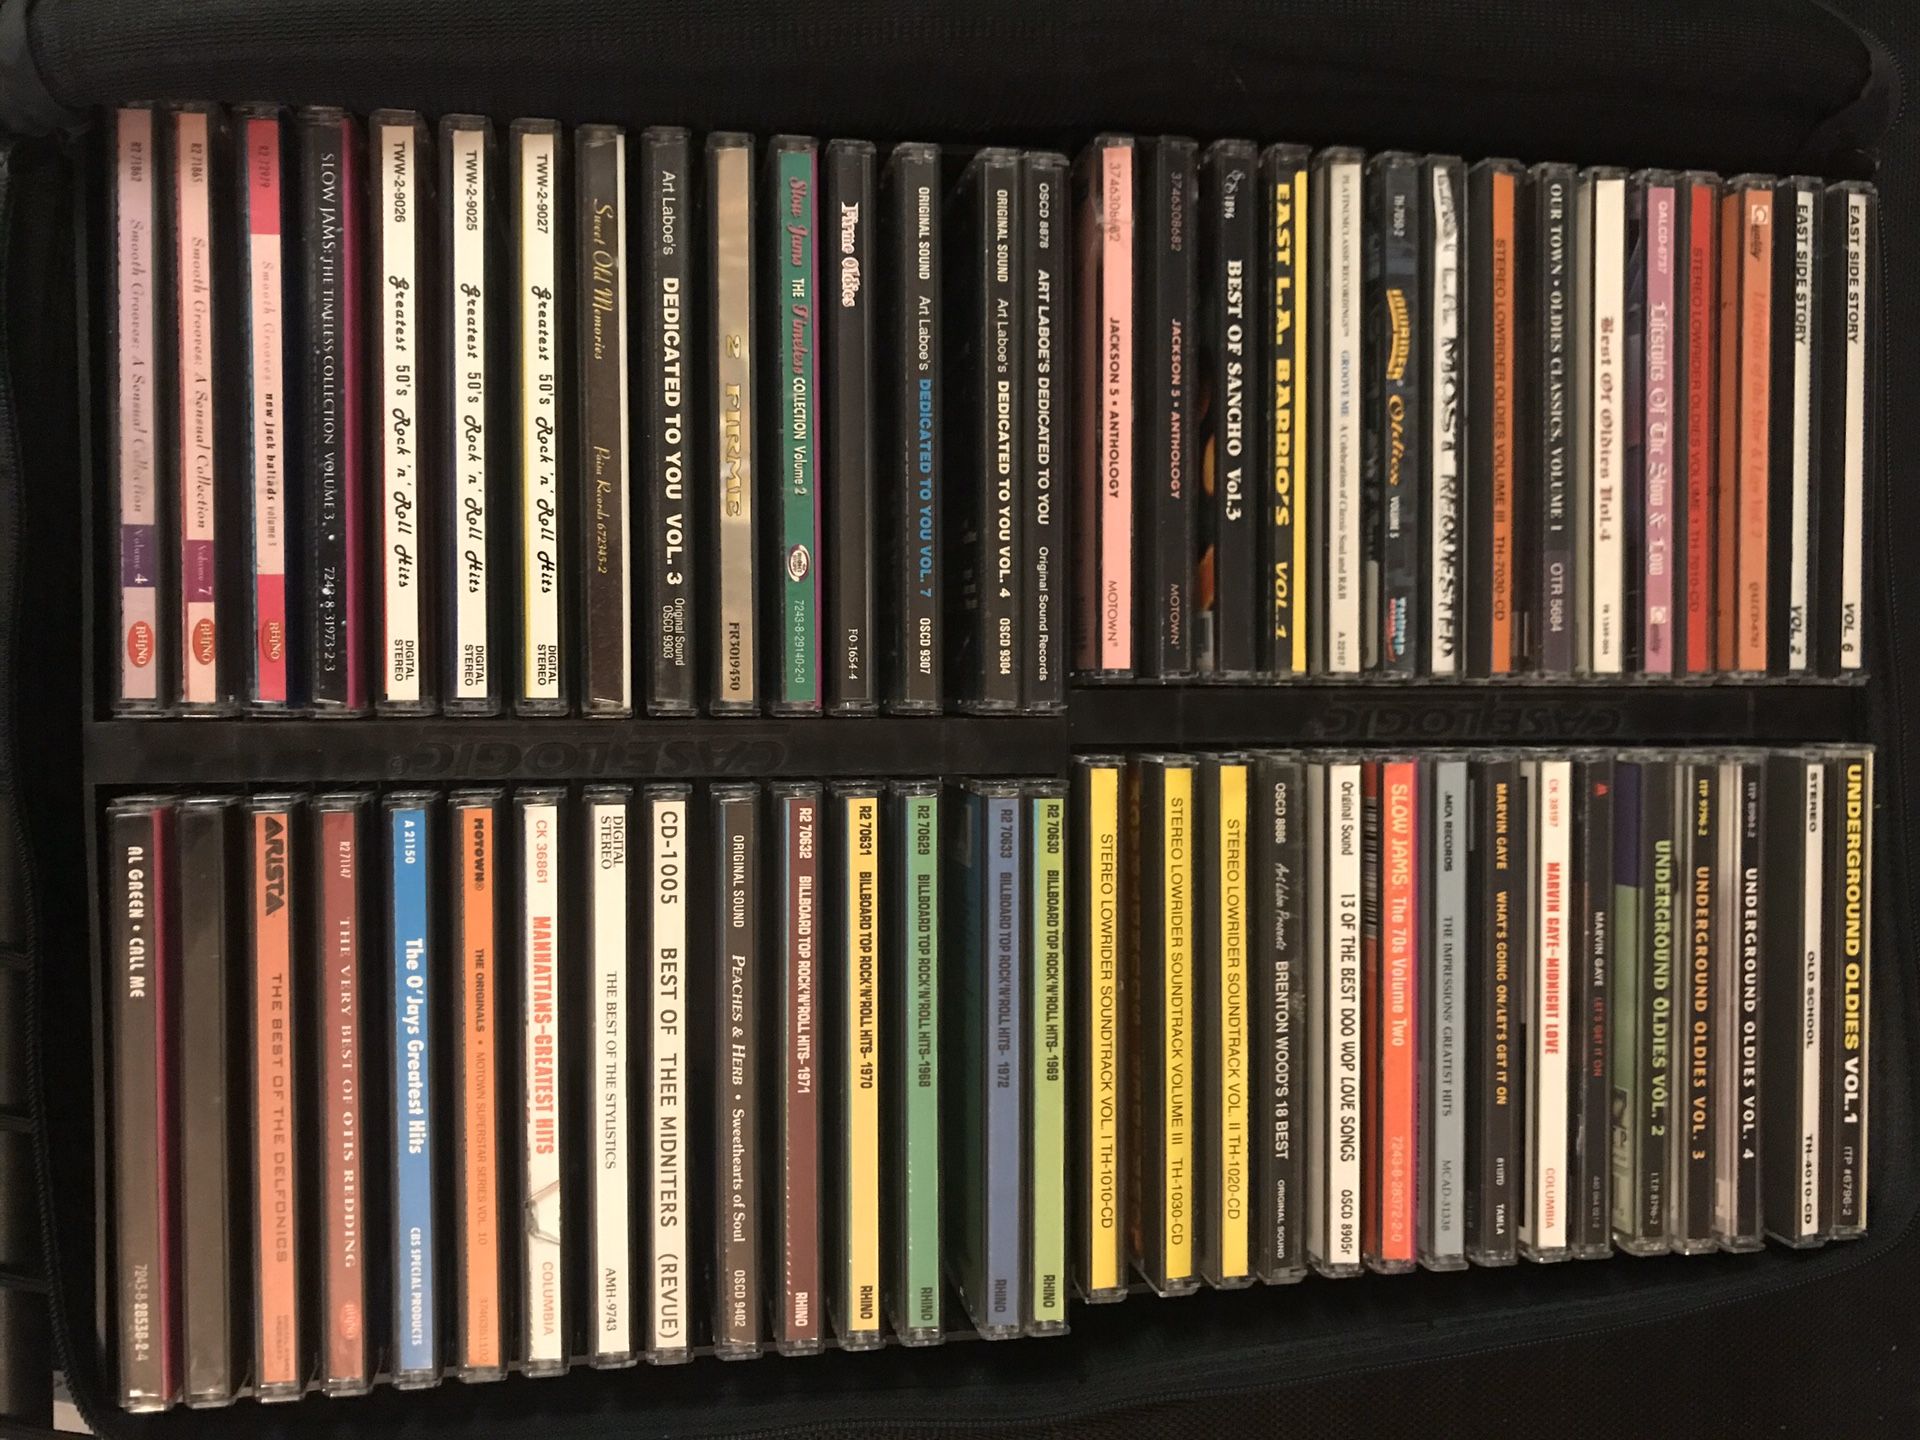 Oldies Music CD collection